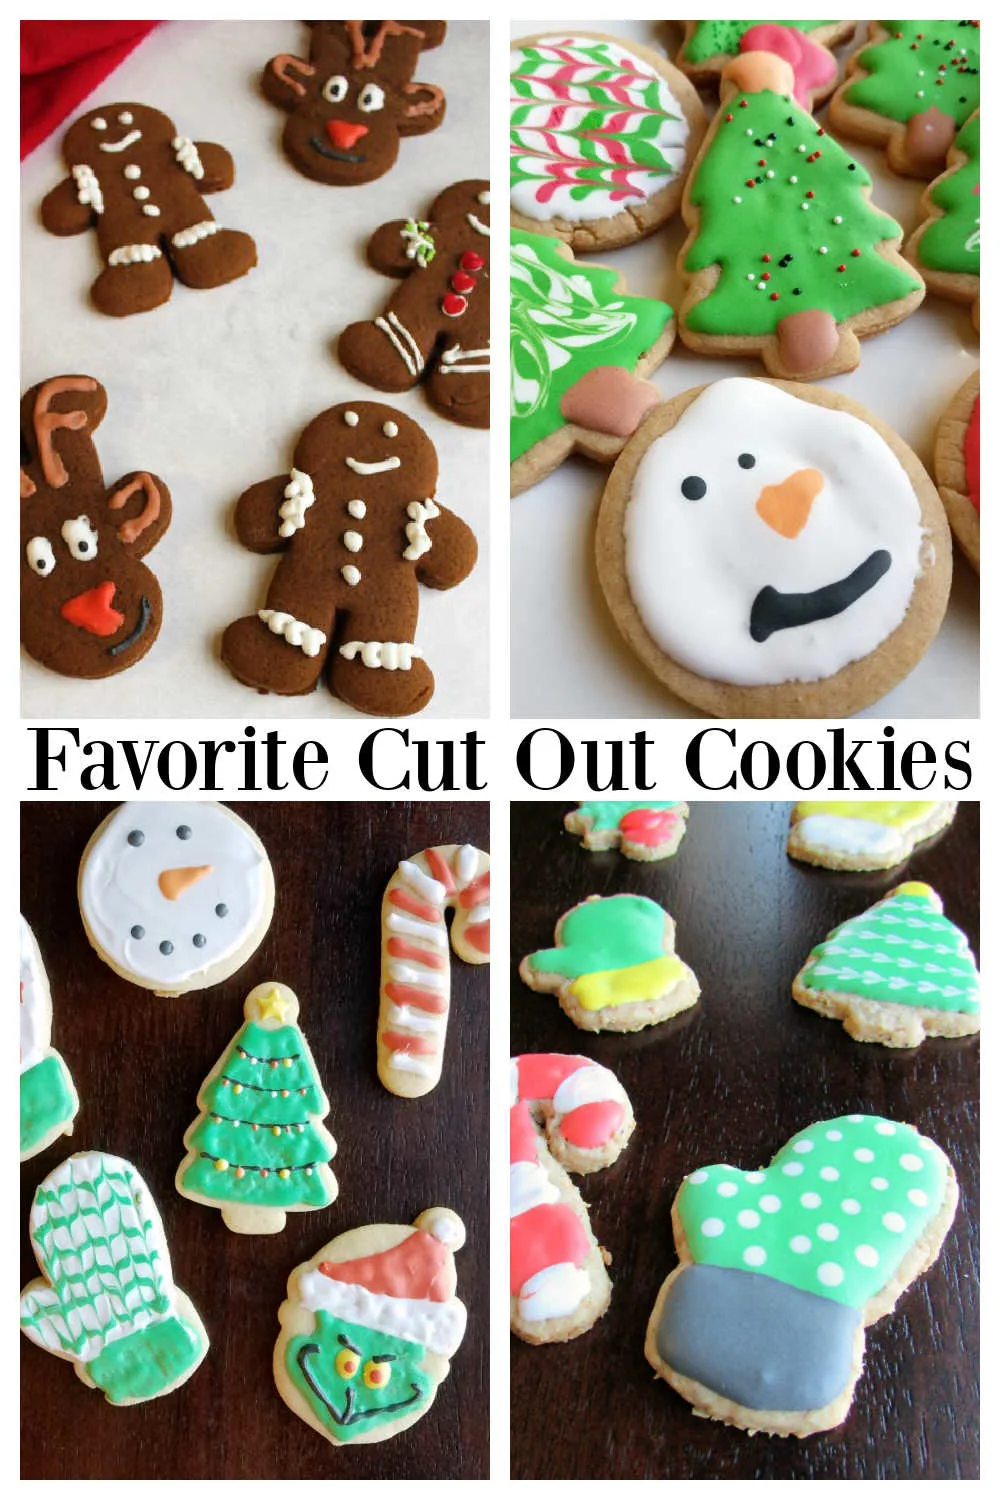 It is always fun to have a cookie cut in a pretty shaped and decorated with frosting, but you aren't limited to sugar cookies. There are lots of flavors and types of cookies you can roll and cut, here are a few of our favorite recipes.